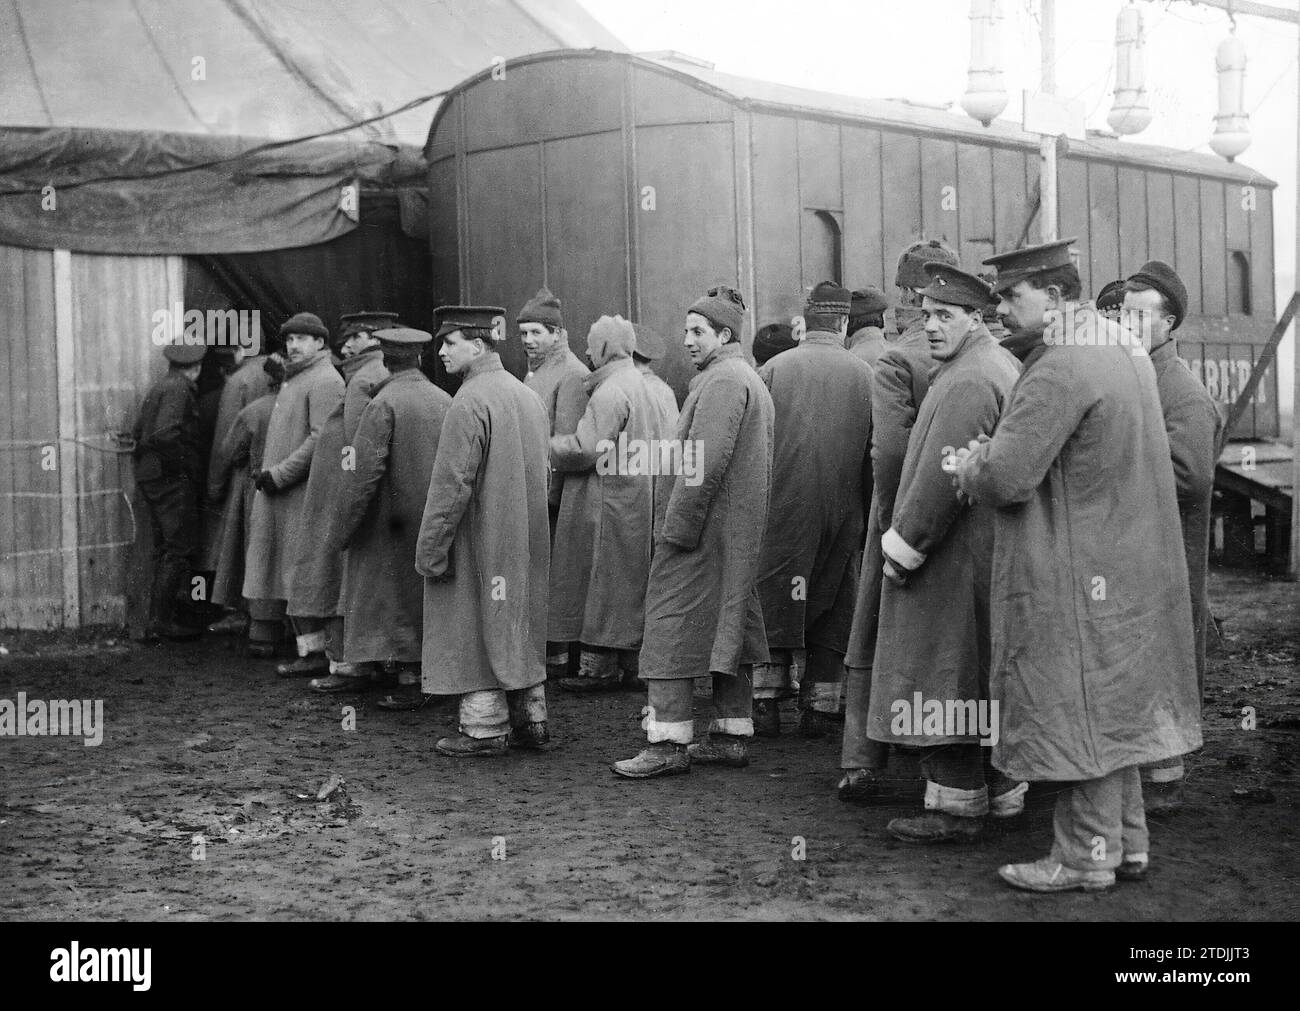 12/31/1914. A theatrical performance in Campaña. Convalescent English Soldiers Entering the barracks prepared for the Theatrical Performances given by the Mr. Hicks company as a gift to the Allied Combatants. Credit: Album / Archivo ABC Stock Photo